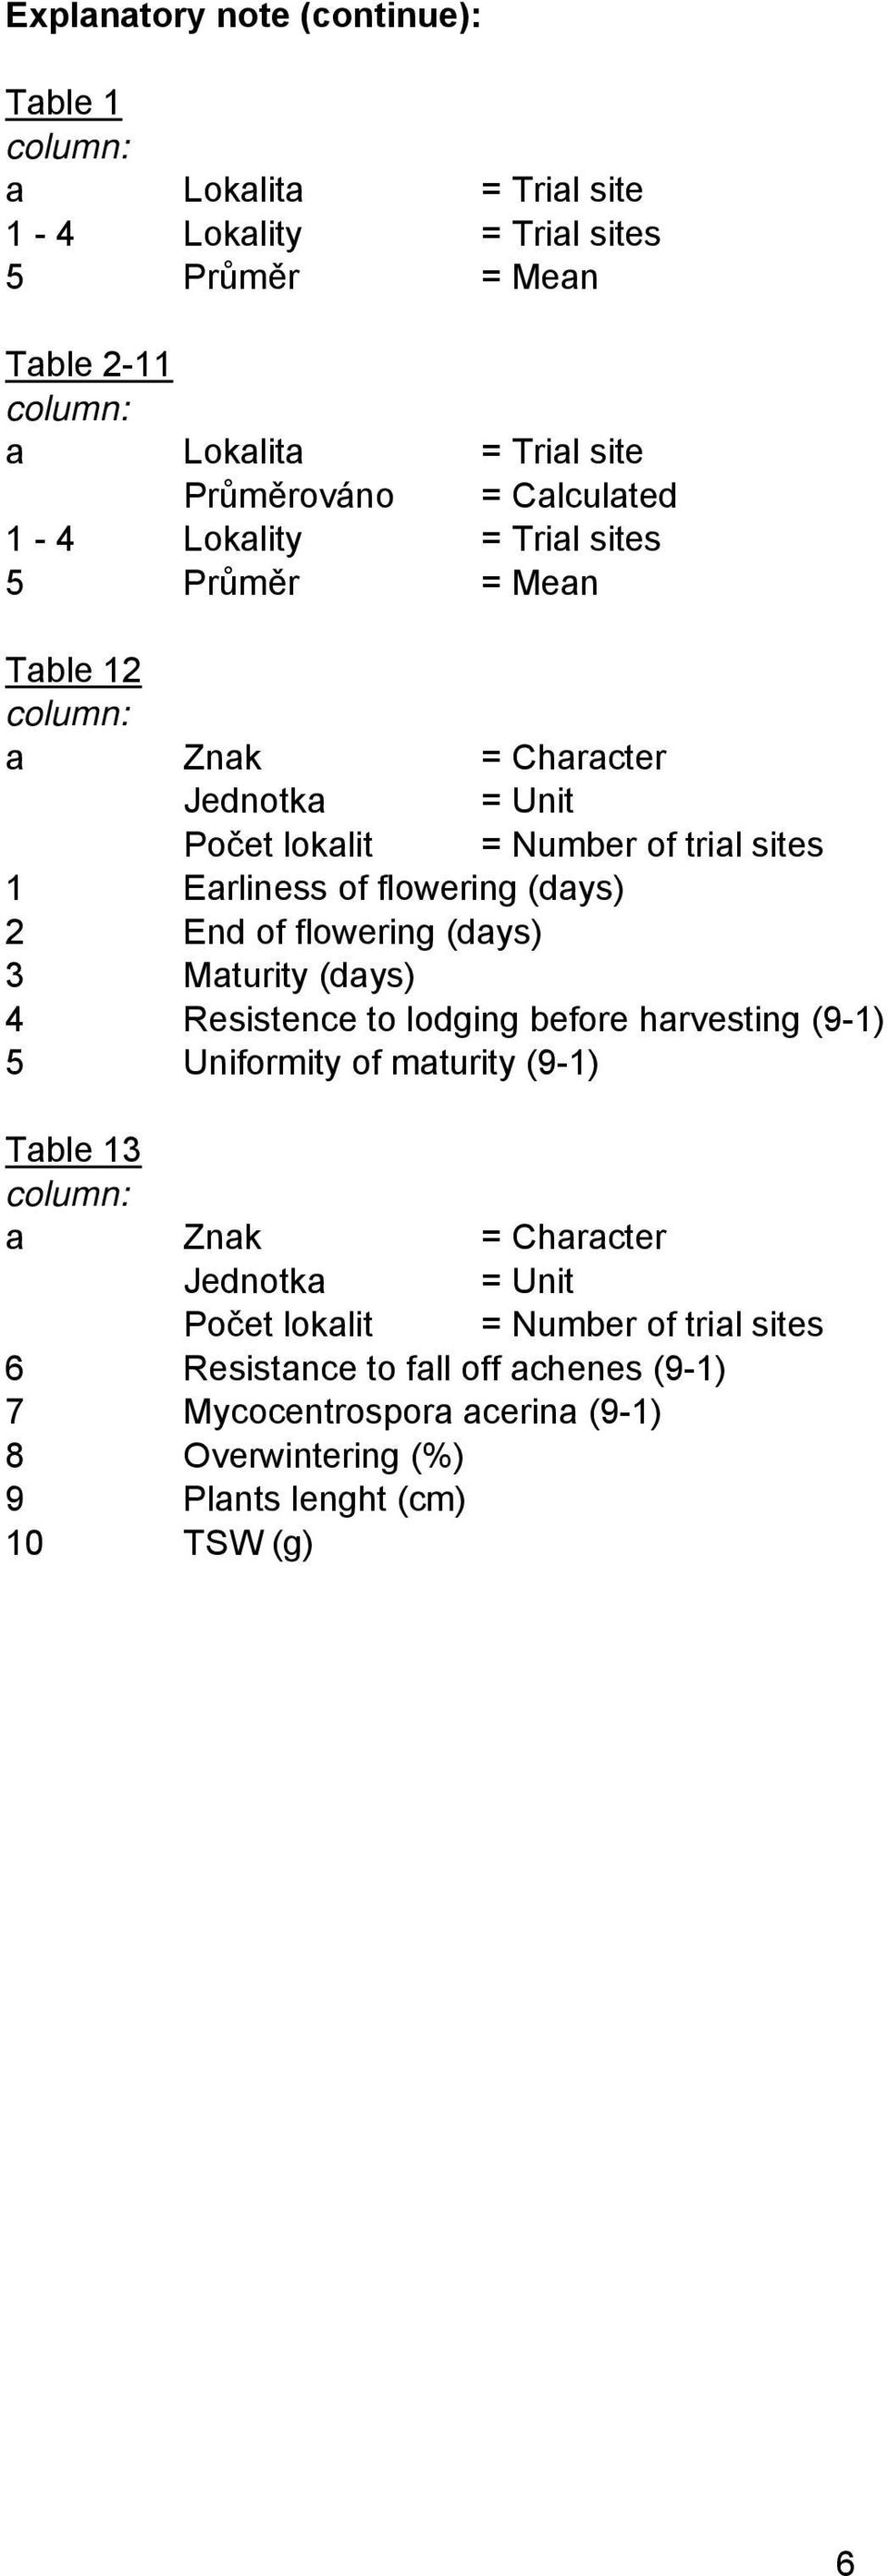 (days) 2 End of flowering (days) 3 Maturity (days) 4 Resistence to lodging before harvesting (9-1) 5 Uniformity of maturity (9-1) Table 13 column: a Znak = Character